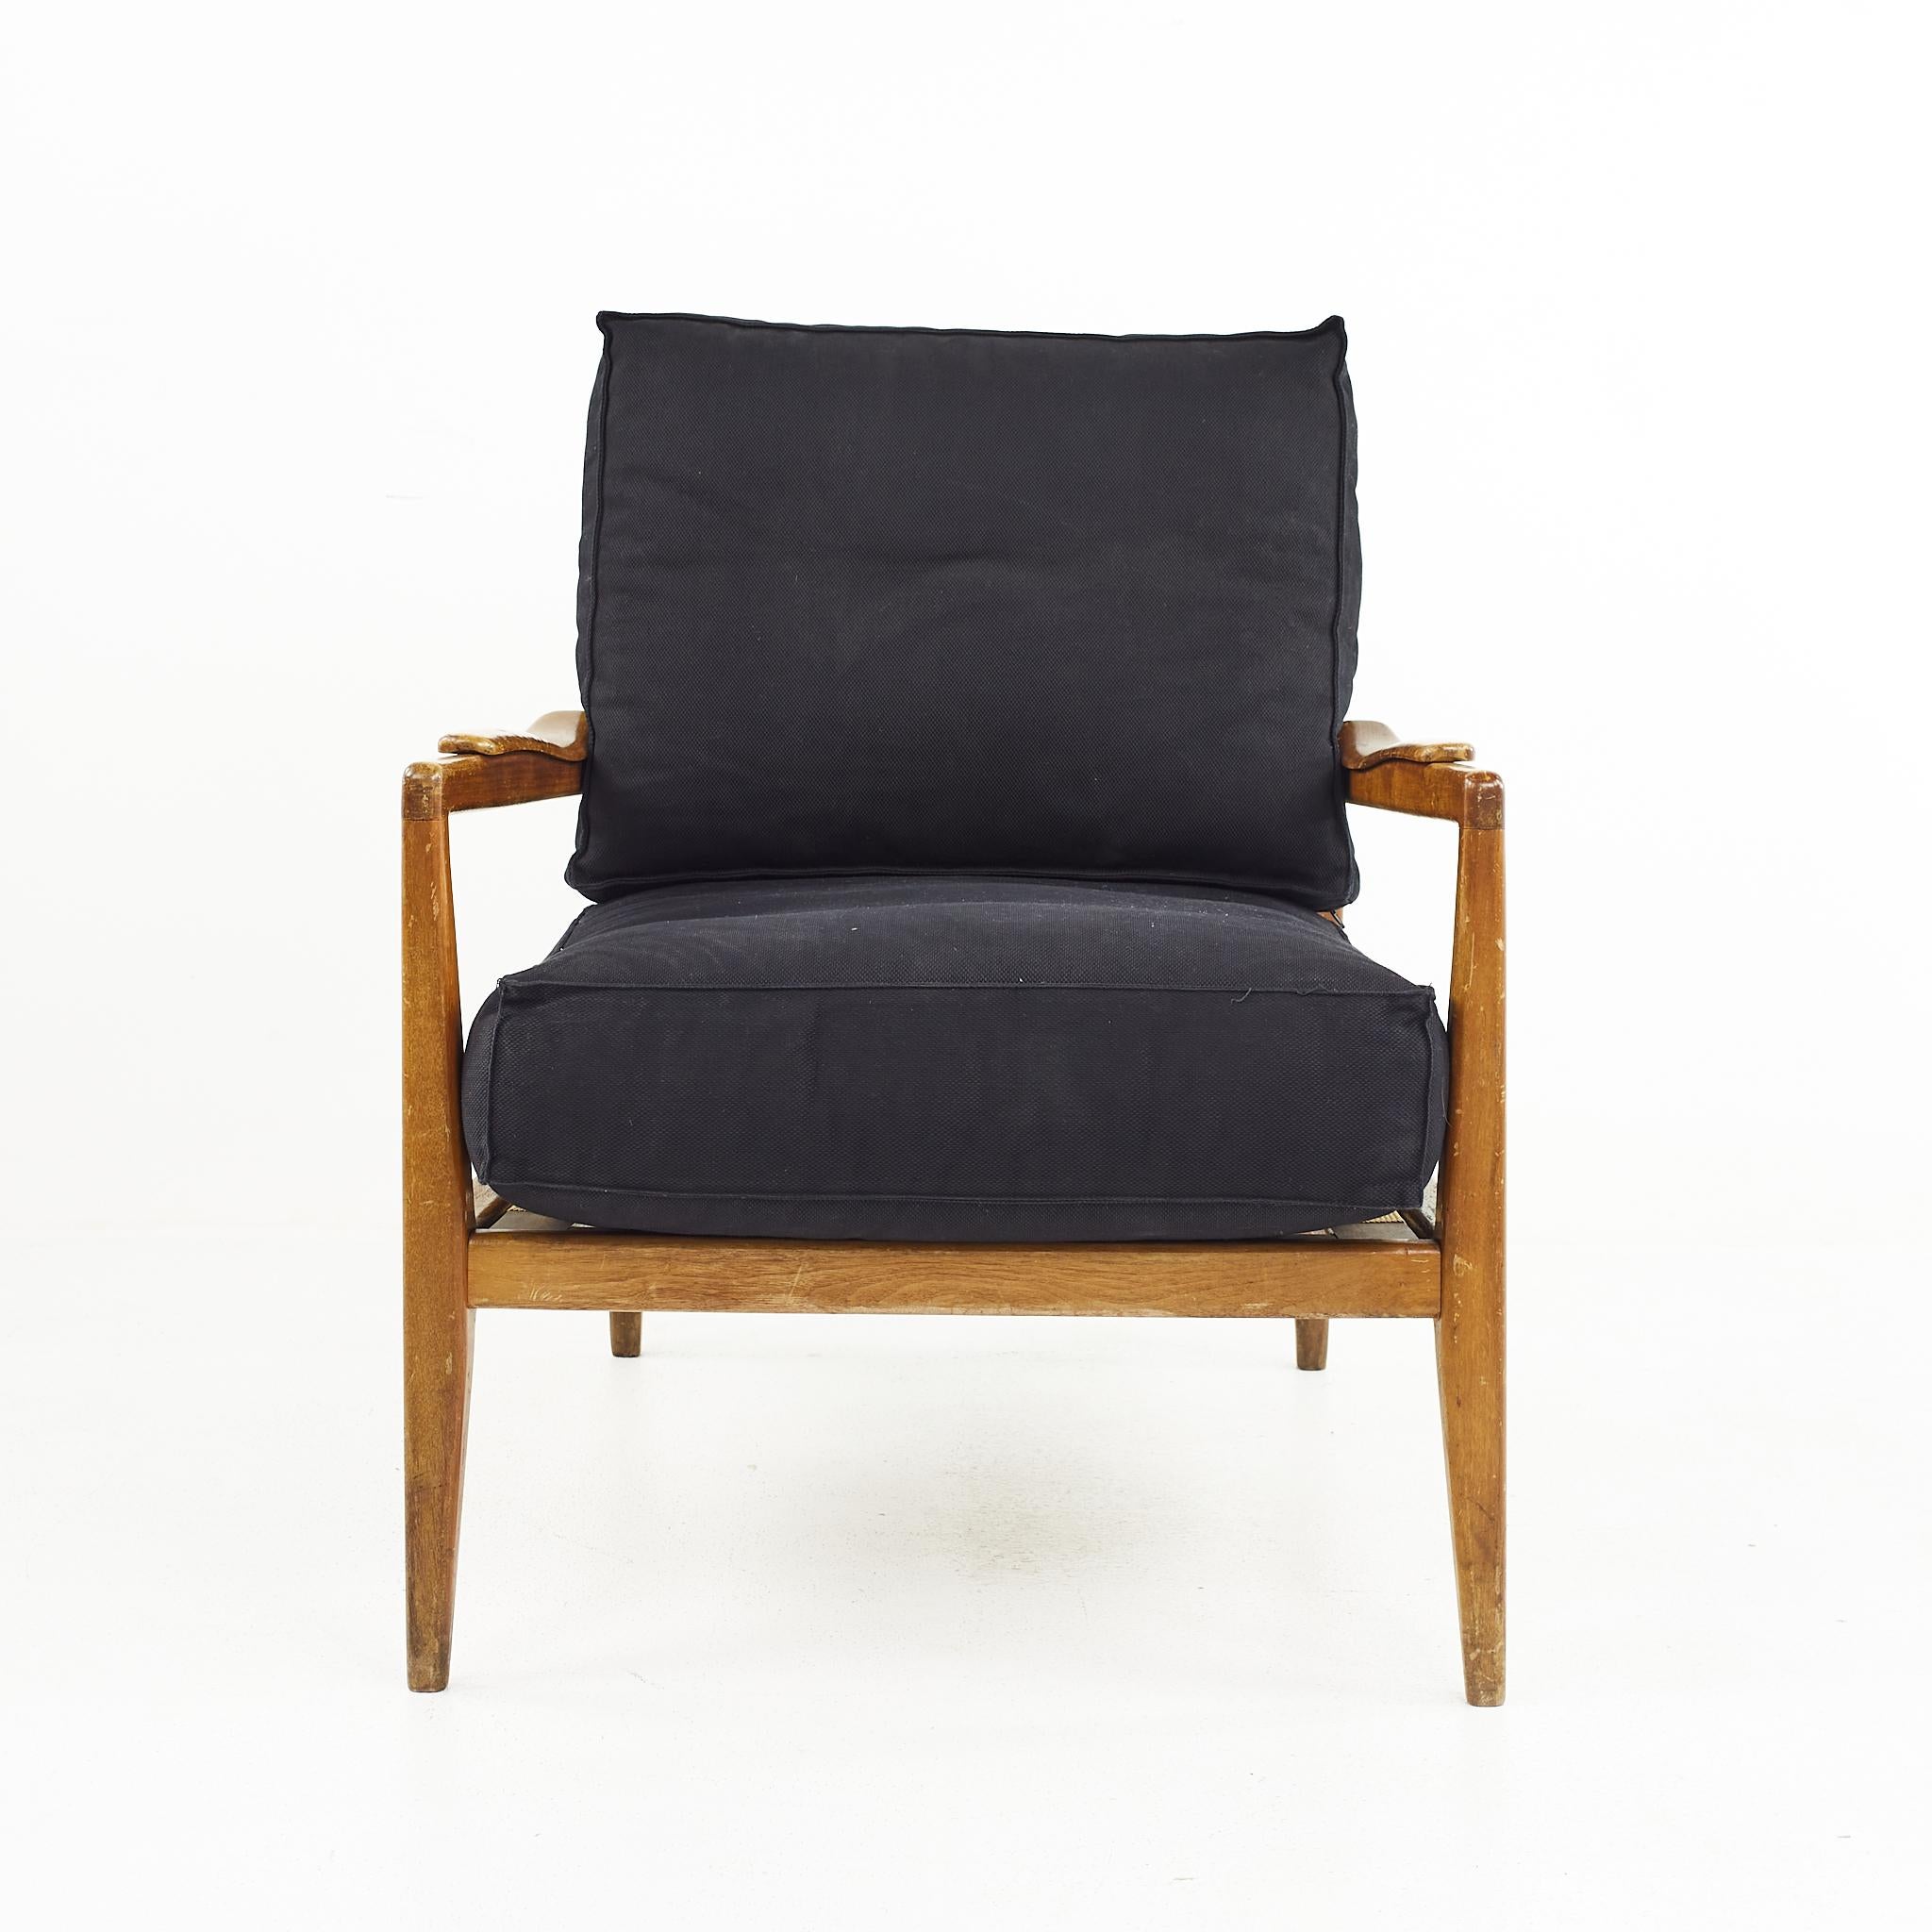 Edmond Spence Urban Aire mid century walnut lounge chair with black upholstery

The chair measures: 27.5 wide x 33.5 deep x 35 high, with a seat height of 19 inches and arm height of 23 inches

All pieces of furniture can be had in what we call